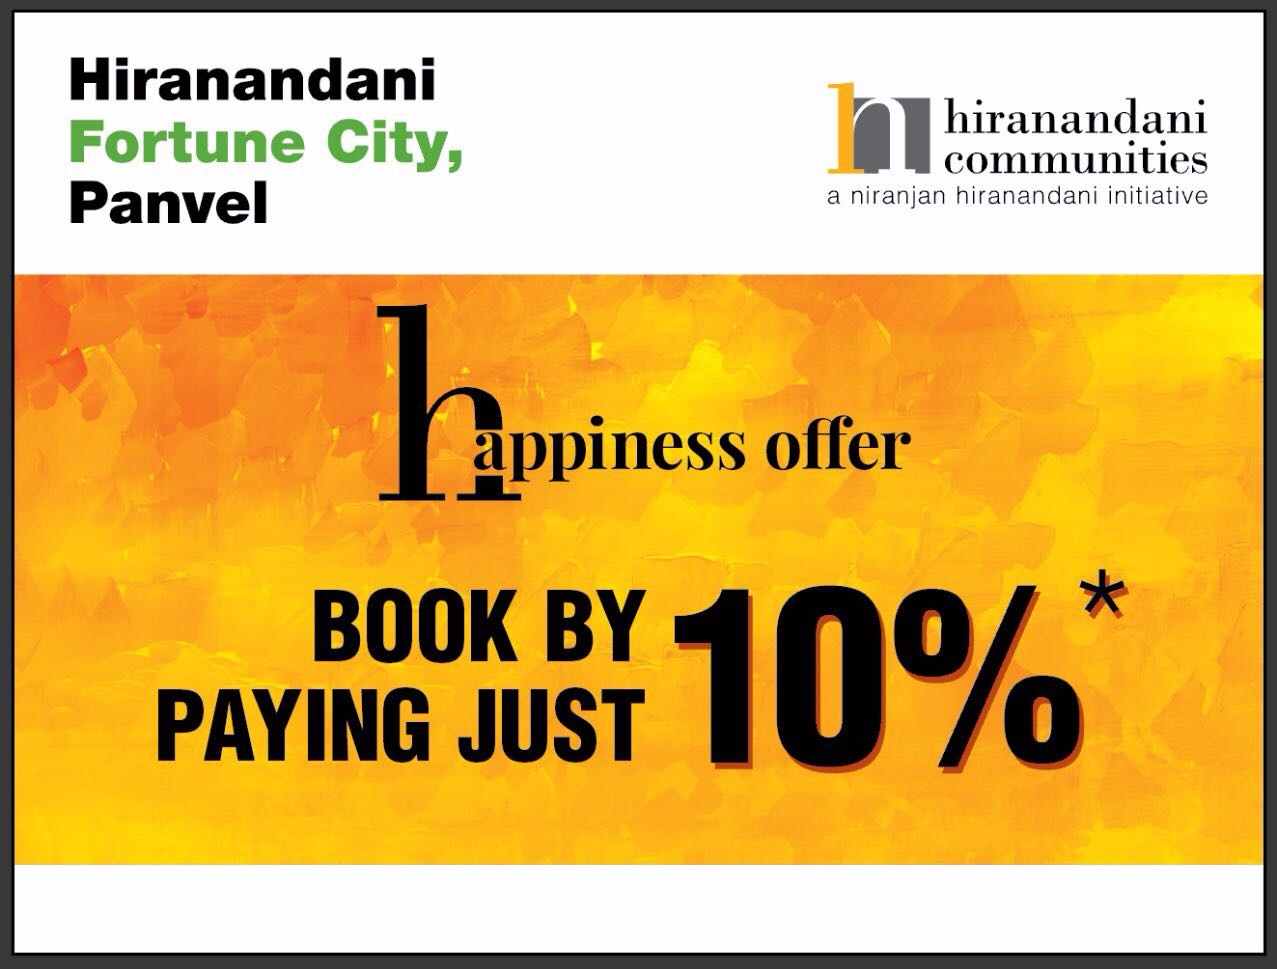 Book your home by paying just 10% at Hiranandani Fortune City in Navi Mumbai